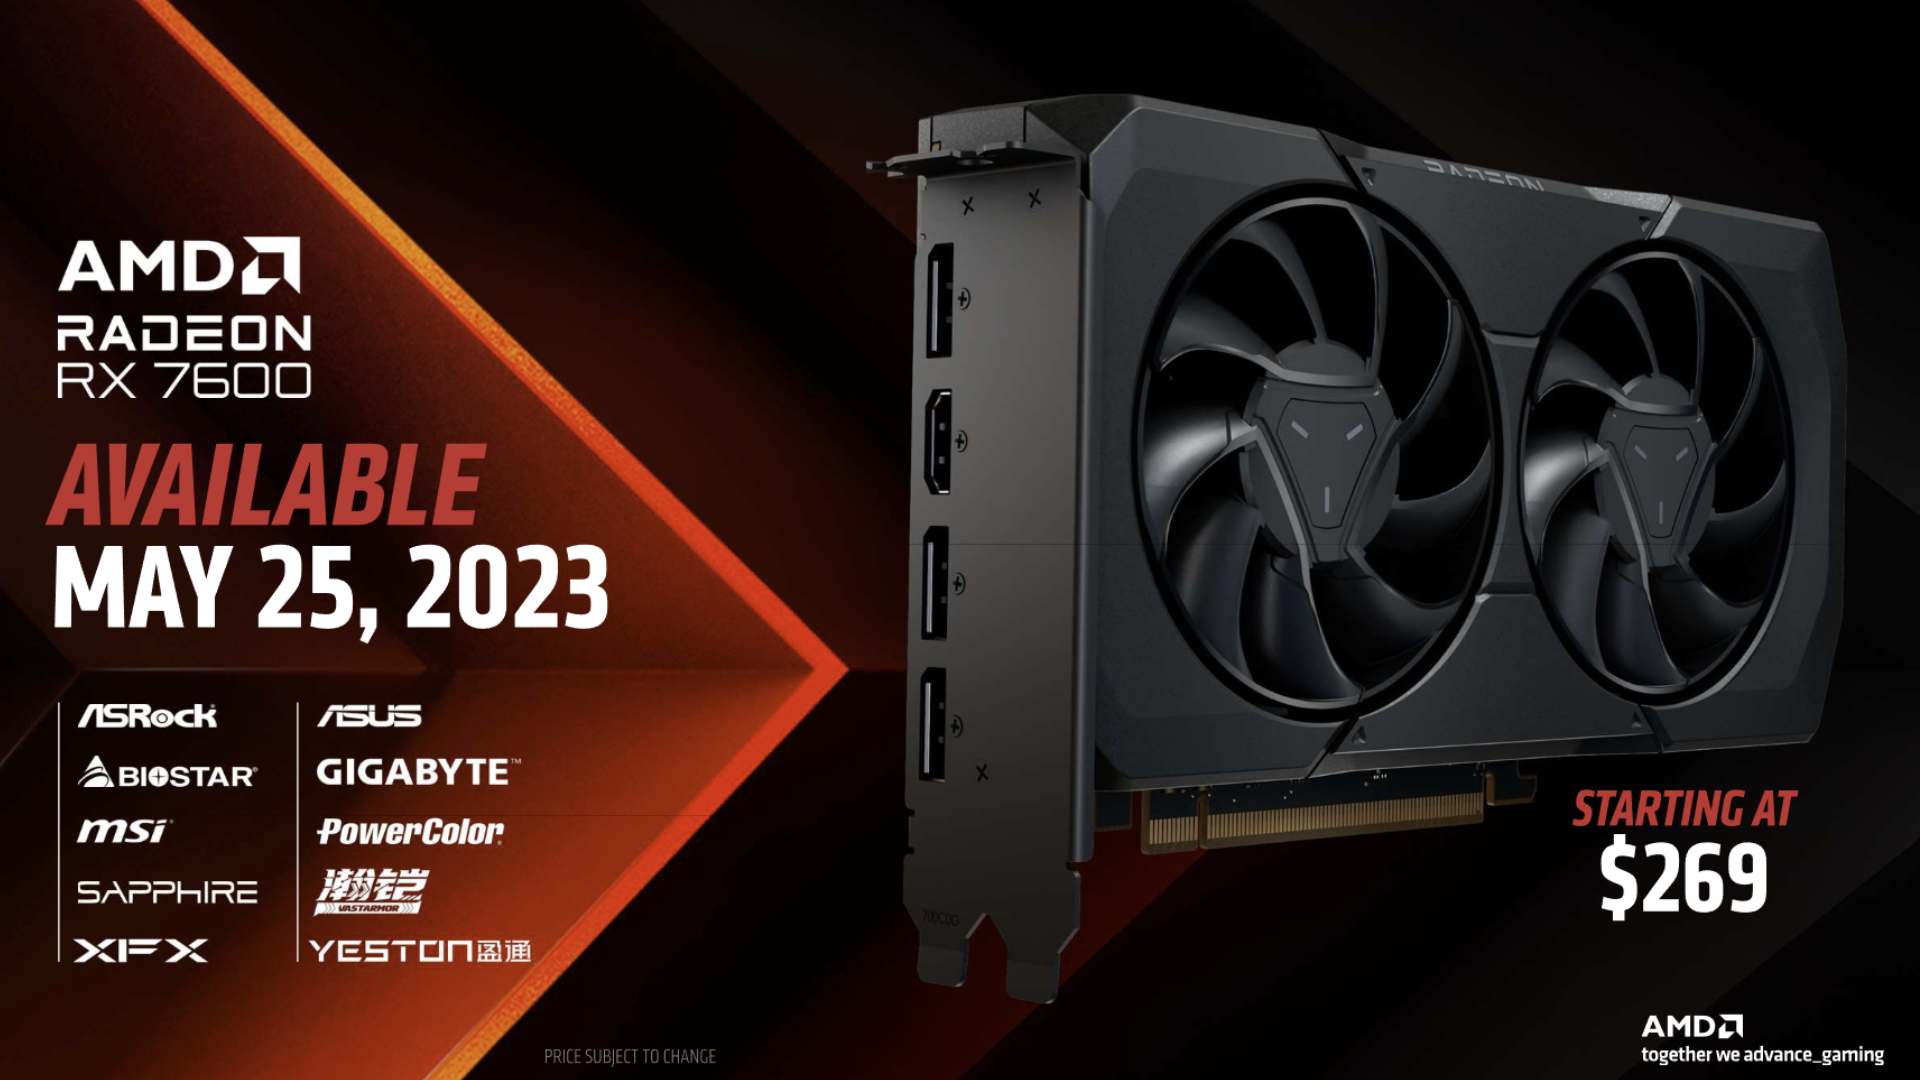 Graphic for AMD Radeon RX 7600 with price, image of graphics card release date on left hand side.